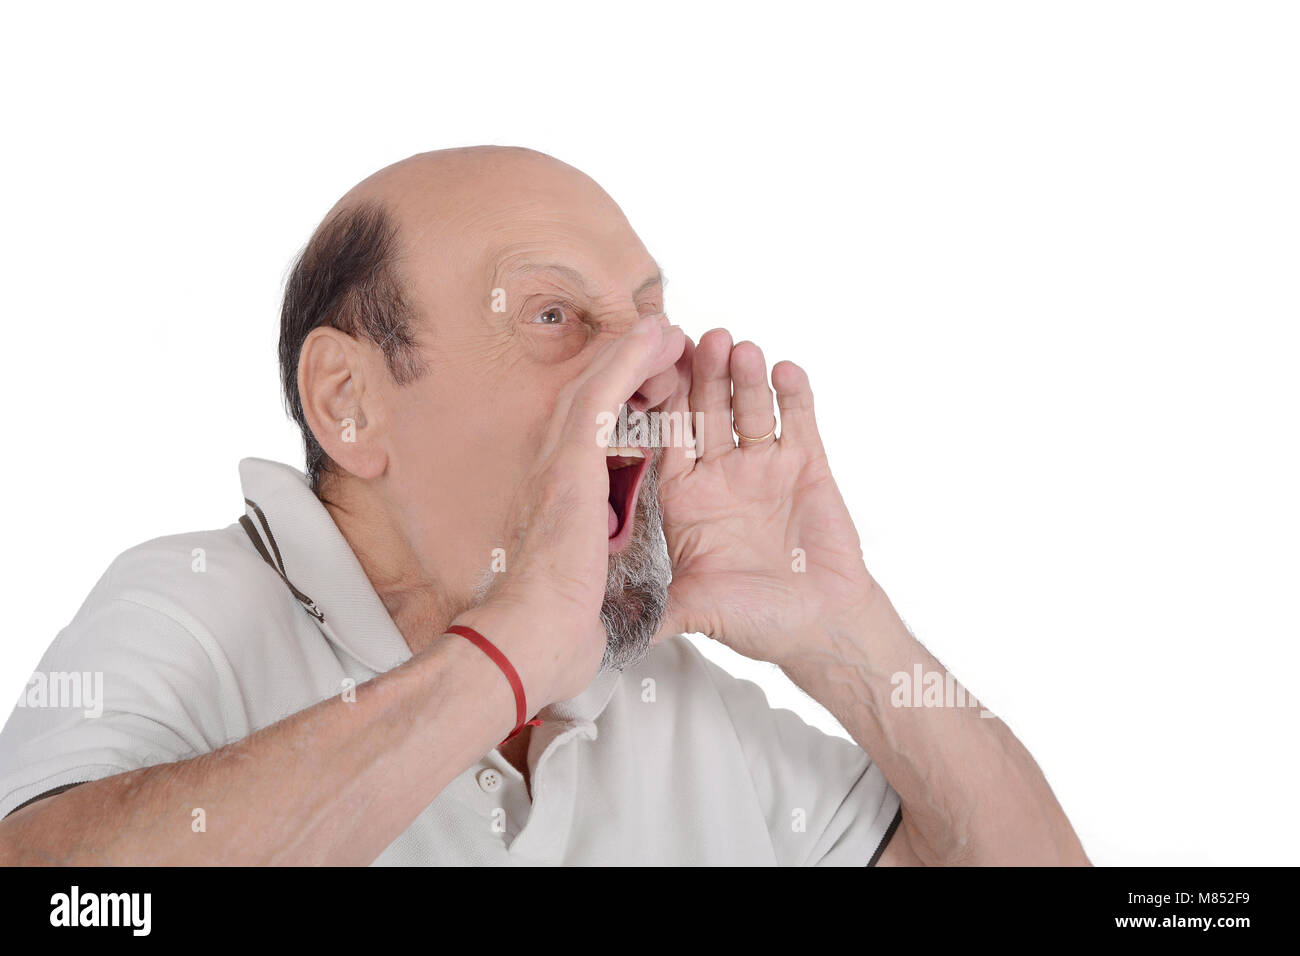 Portrait of elderly man screaming with her hands on face. Isolated white background Stock Photo